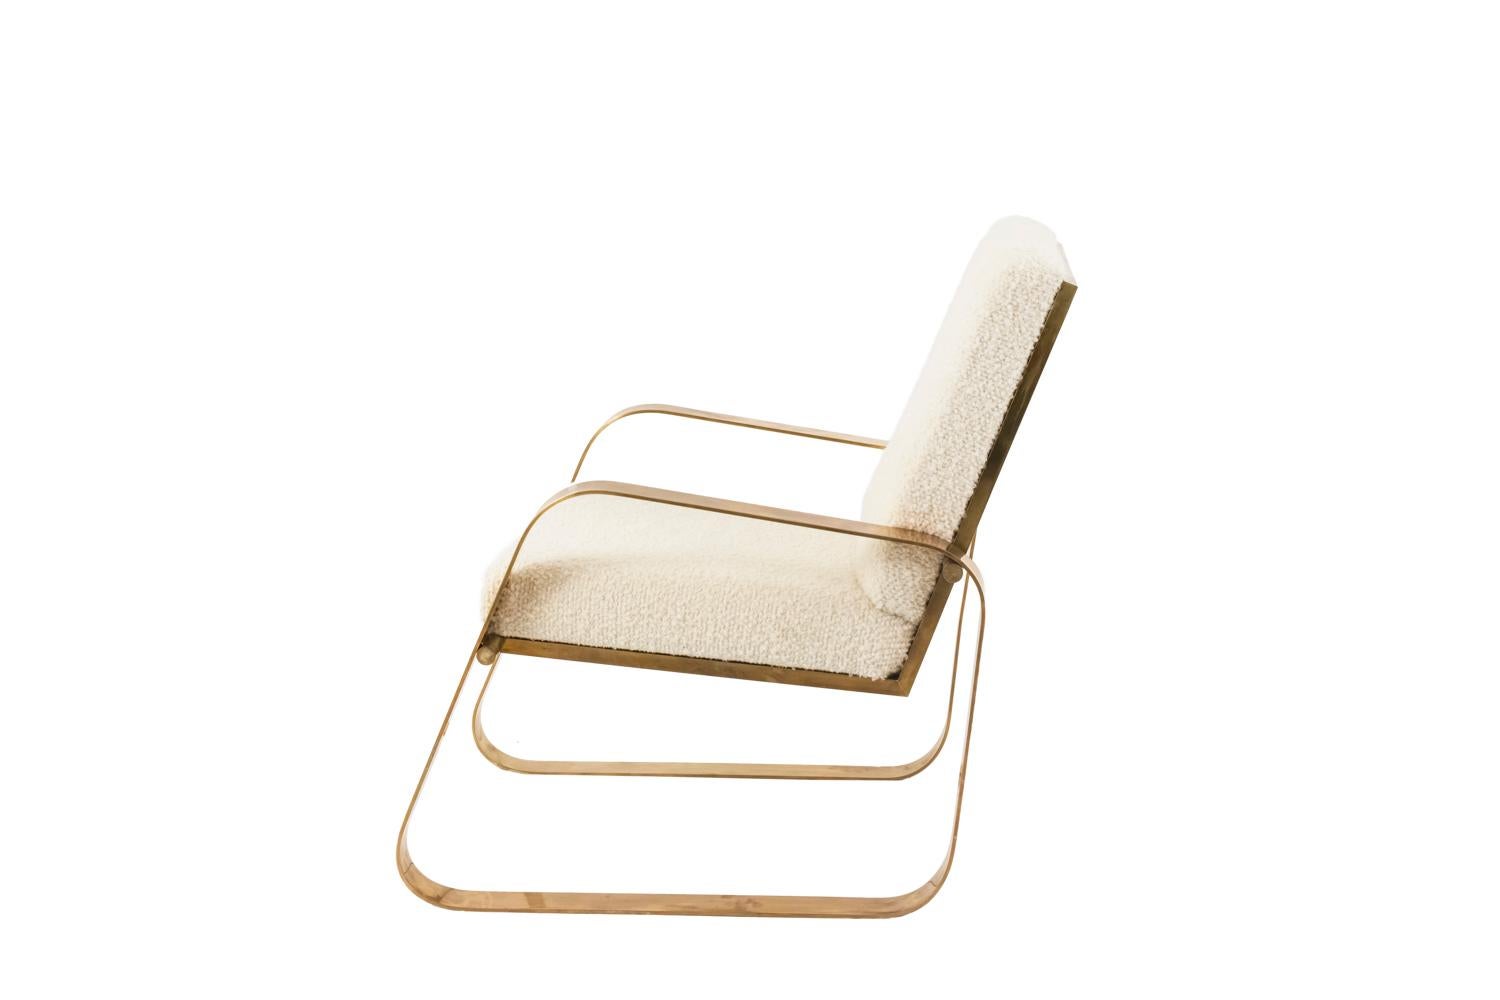 Pair of Modern Easy Chairs in Gilt Brushed Brass, Contemporary Work In Good Condition For Sale In Saint-Ouen, FR